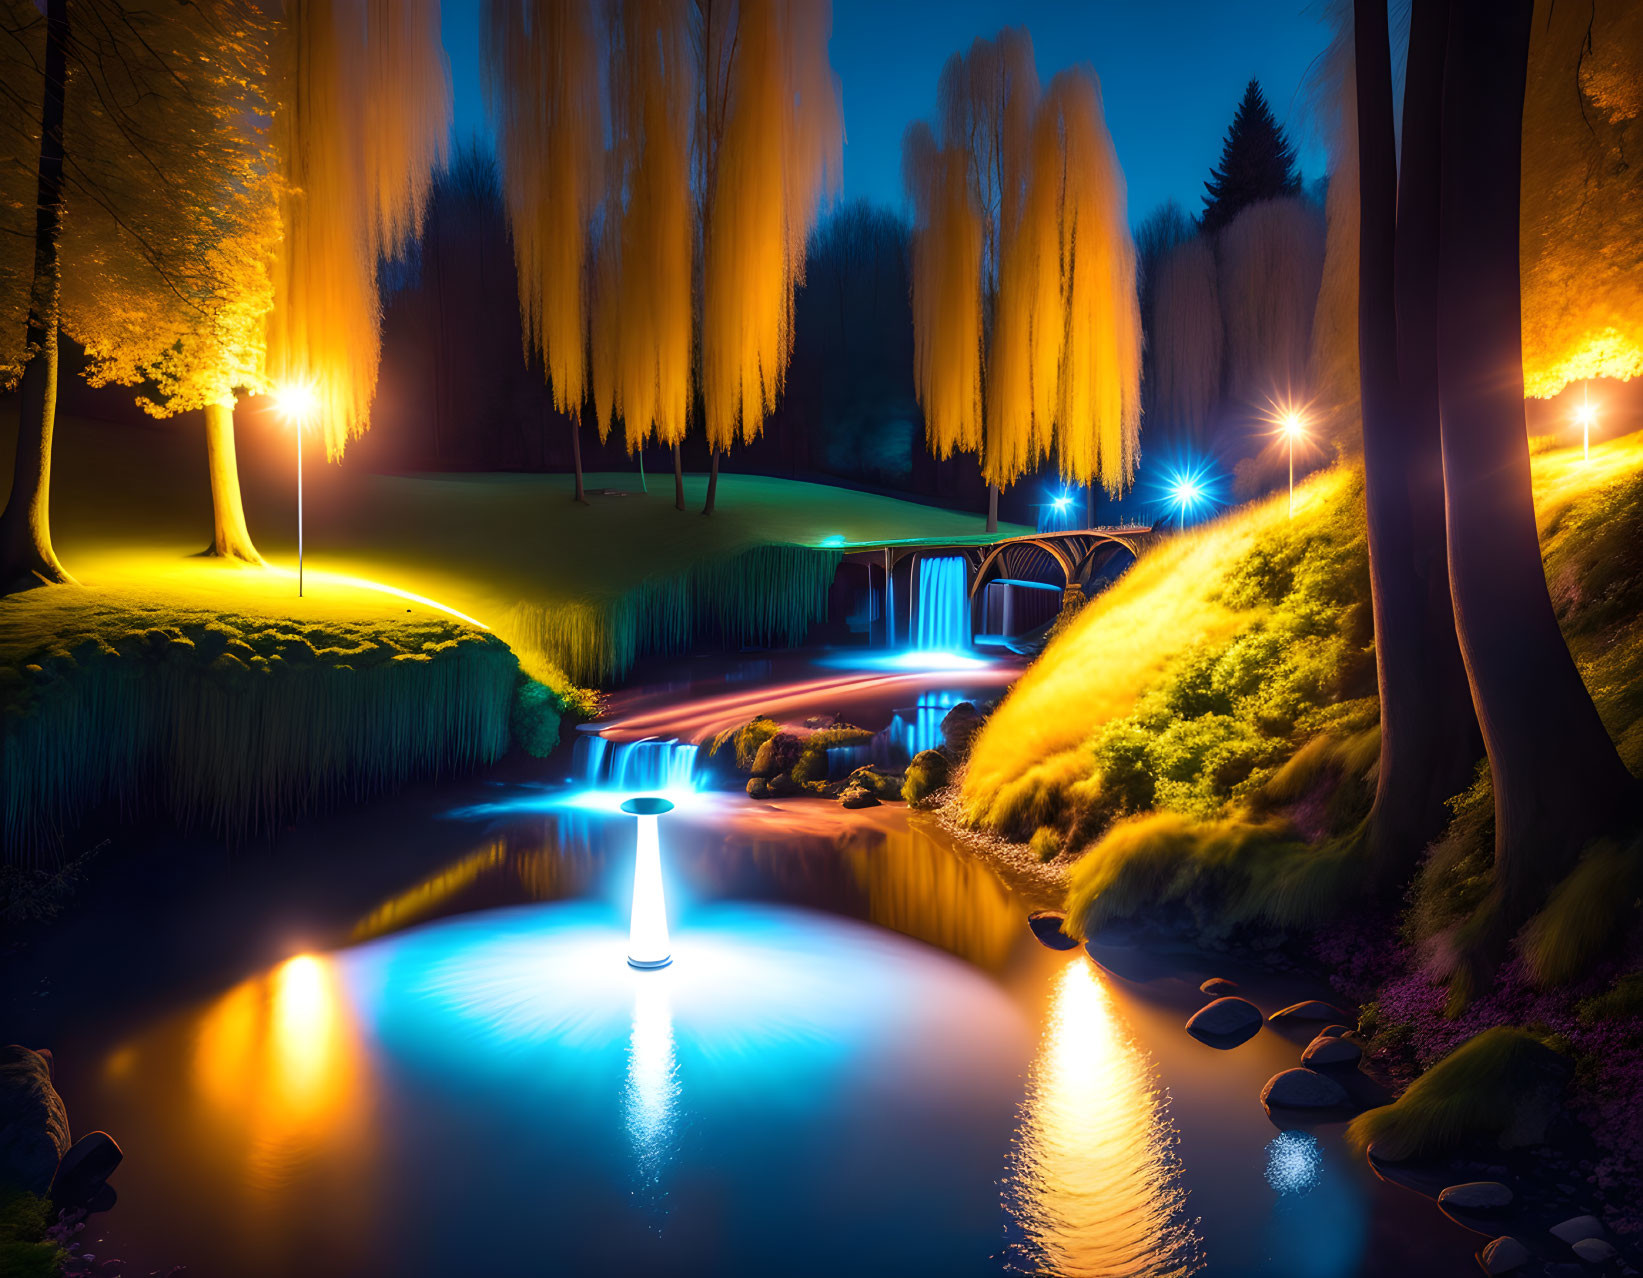 Fantasy landscape with glowing trees, luminous waterfall, and ethereal lights